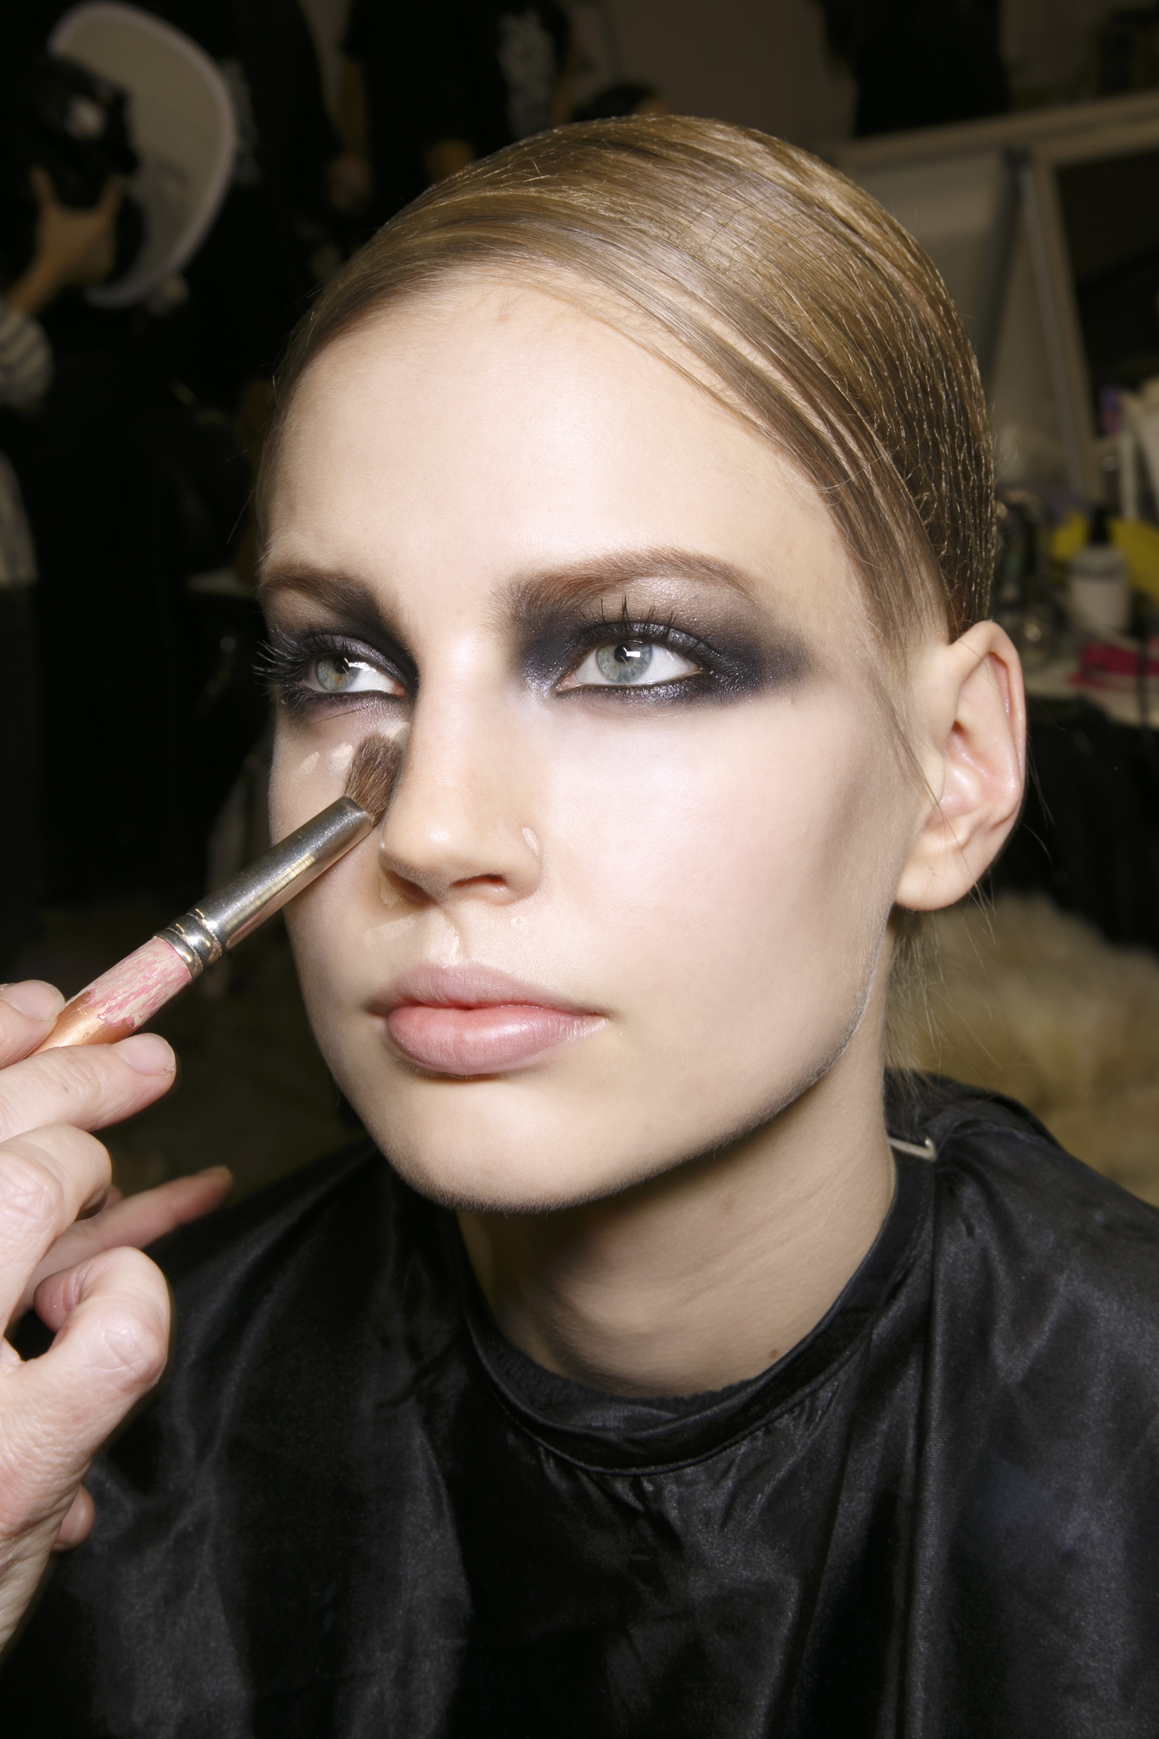 The Best Quick Fixes for 5 Common Makeup Mistakes